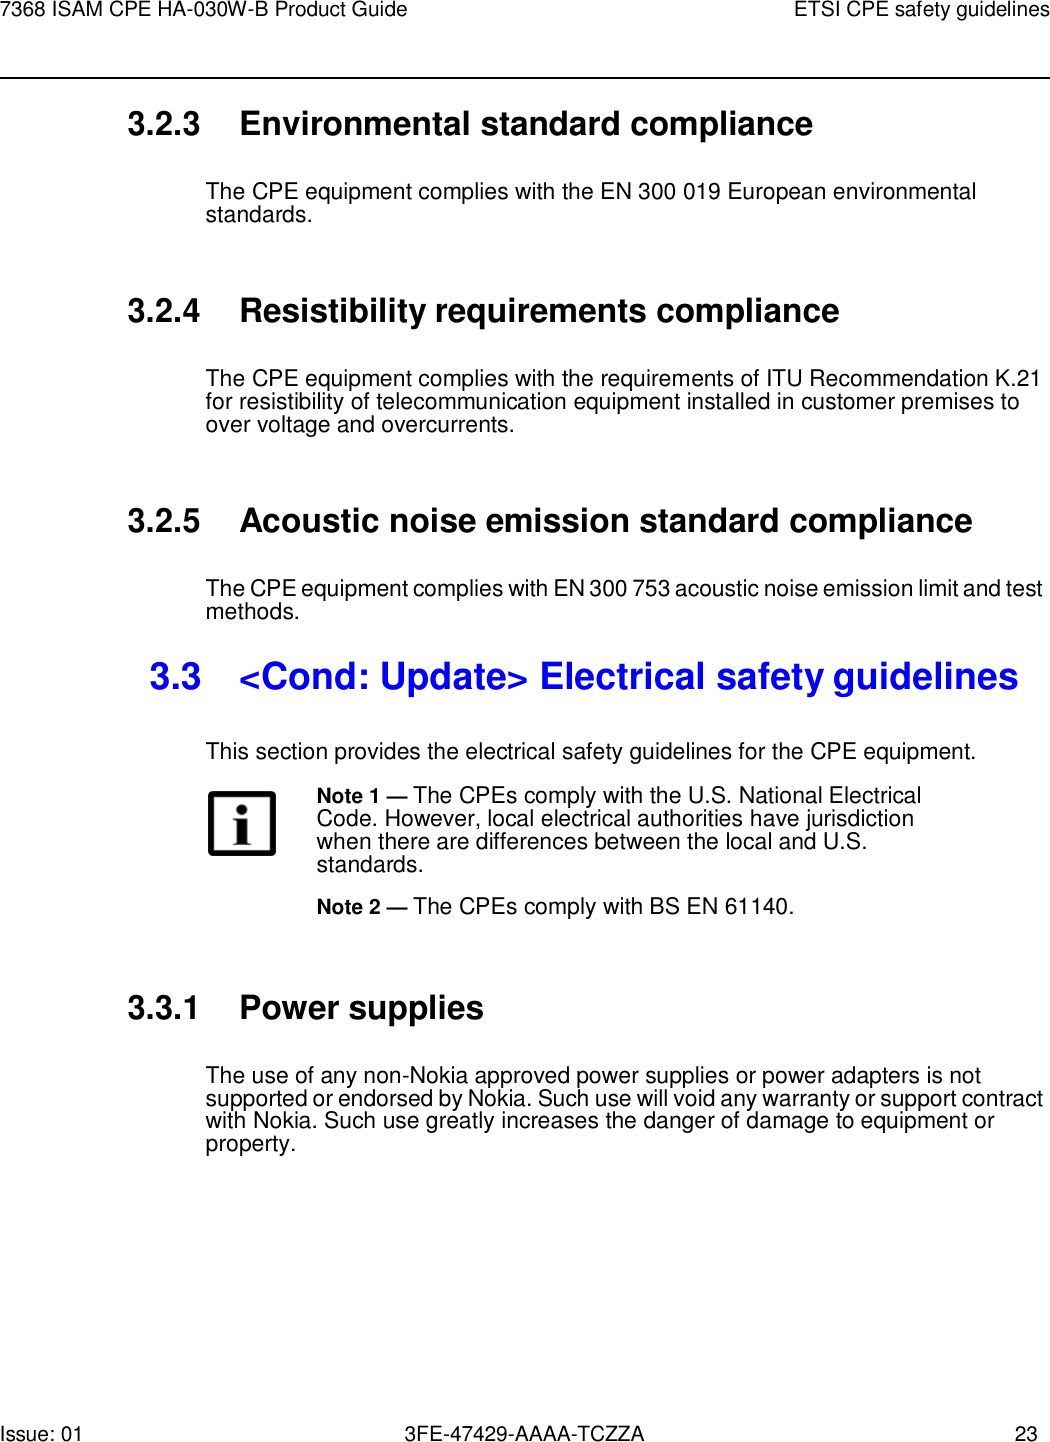 Issue: 01 3FE-47429-AAAA-TCZZA 23 7368 ISAM CPE HA-030W-B Product Guide ETSI CPE safety guidelines    3.2.3 Environmental standard compliance  The CPE equipment complies with the EN 300 019 European environmental standards.   3.2.4 Resistibility requirements compliance  The CPE equipment complies with the requirements of ITU Recommendation K.21 for resistibility of telecommunication equipment installed in customer premises to over voltage and overcurrents.   3.2.5 Acoustic noise emission standard compliance  The CPE equipment complies with EN 300 753 acoustic noise emission limit and test methods.  3.3  &lt;Cond: Update&gt; Electrical safety guidelines  This section provides the electrical safety guidelines for the CPE equipment. Note 1 — The CPEs comply with the U.S. National Electrical Code. However, local electrical authorities have jurisdiction when there are differences between the local and U.S. standards. Note 2 — The CPEs comply with BS EN 61140.   3.3.1 Power supplies  The use of any non-Nokia approved power supplies or power adapters is not supported or endorsed by Nokia. Such use will void any warranty or support contract with Nokia. Such use greatly increases the danger of damage to equipment or property. 